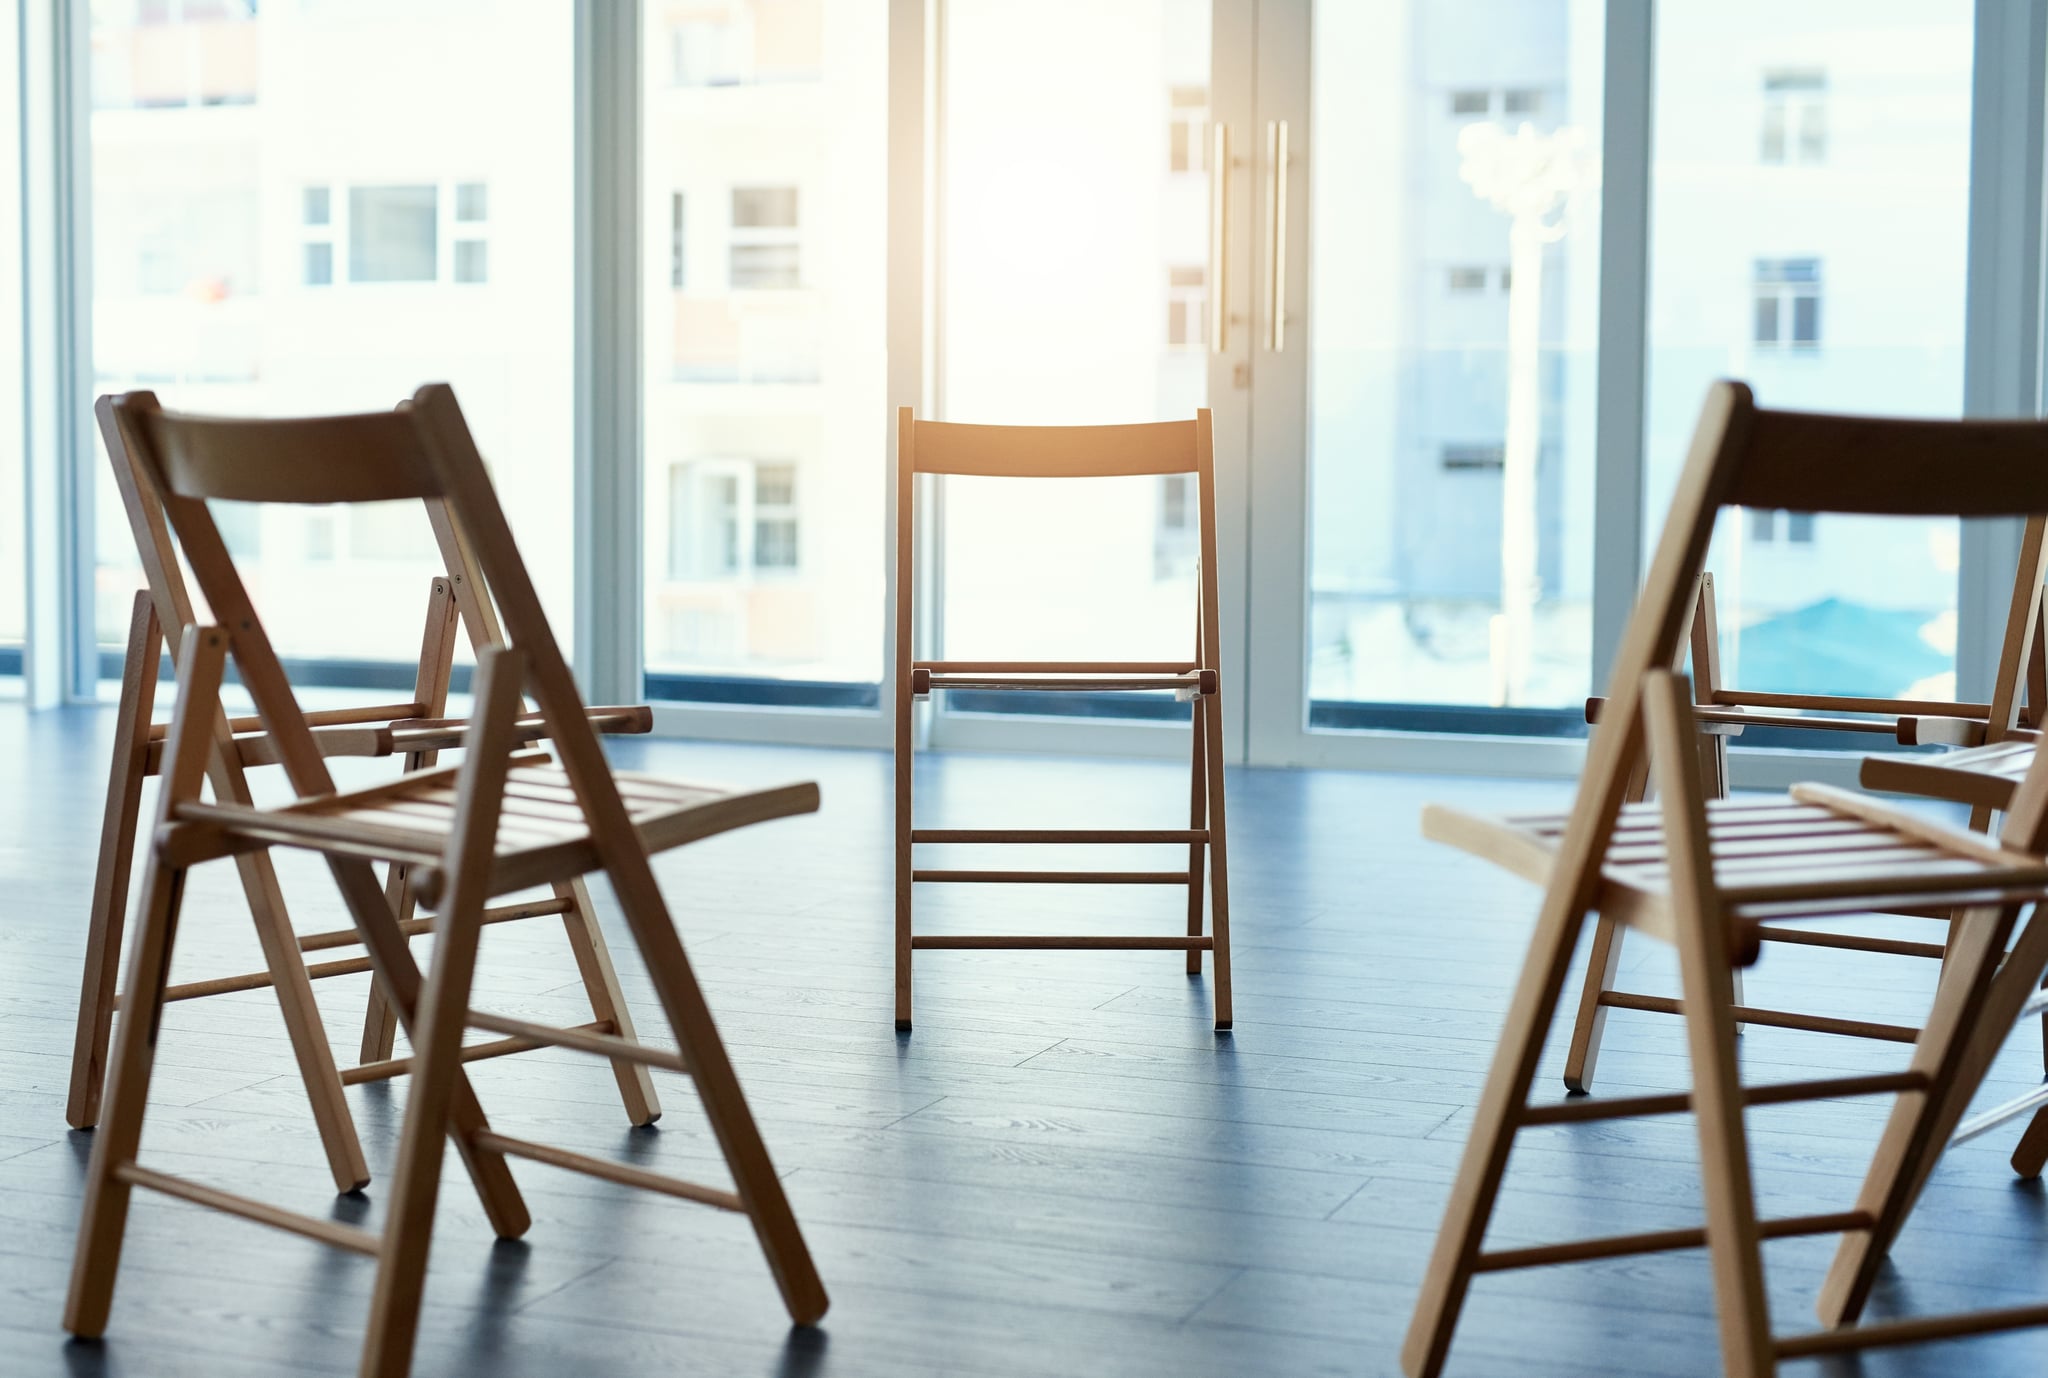 Shot of chairs in an empty room with no people inside